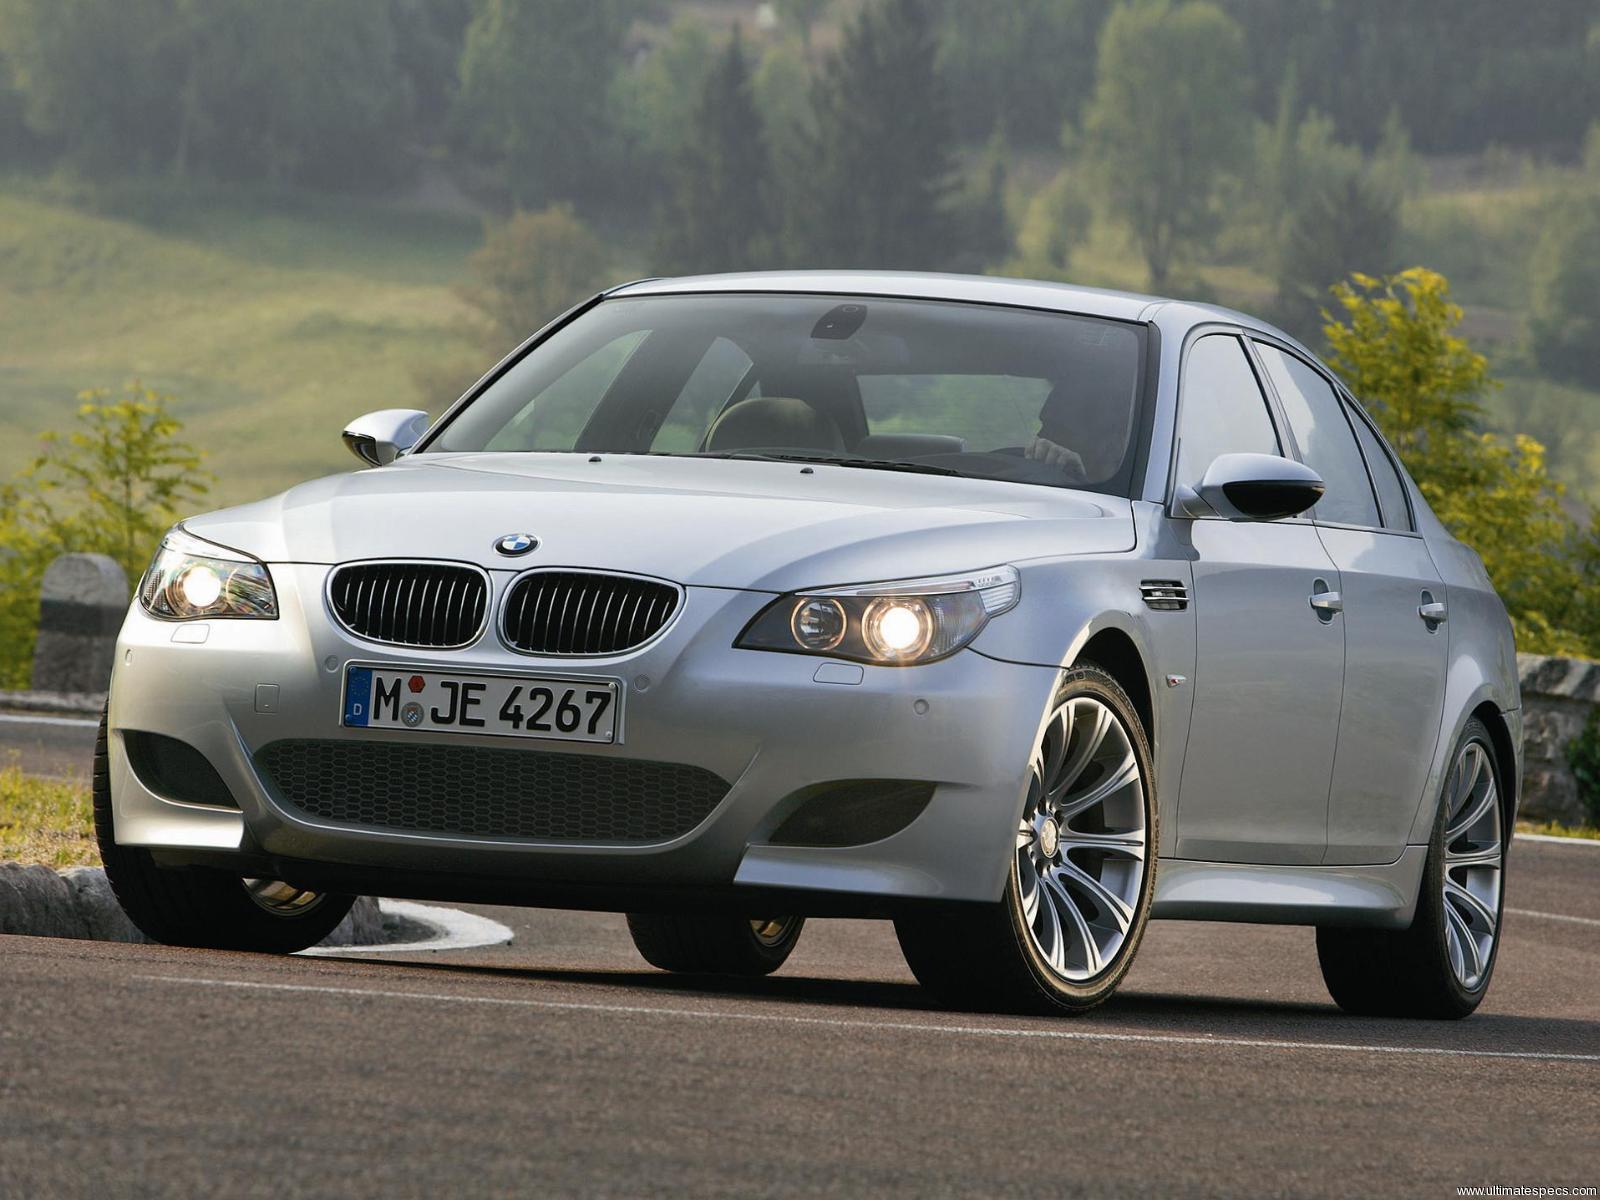 BMW E60 5 Series Images, pictures, gallery